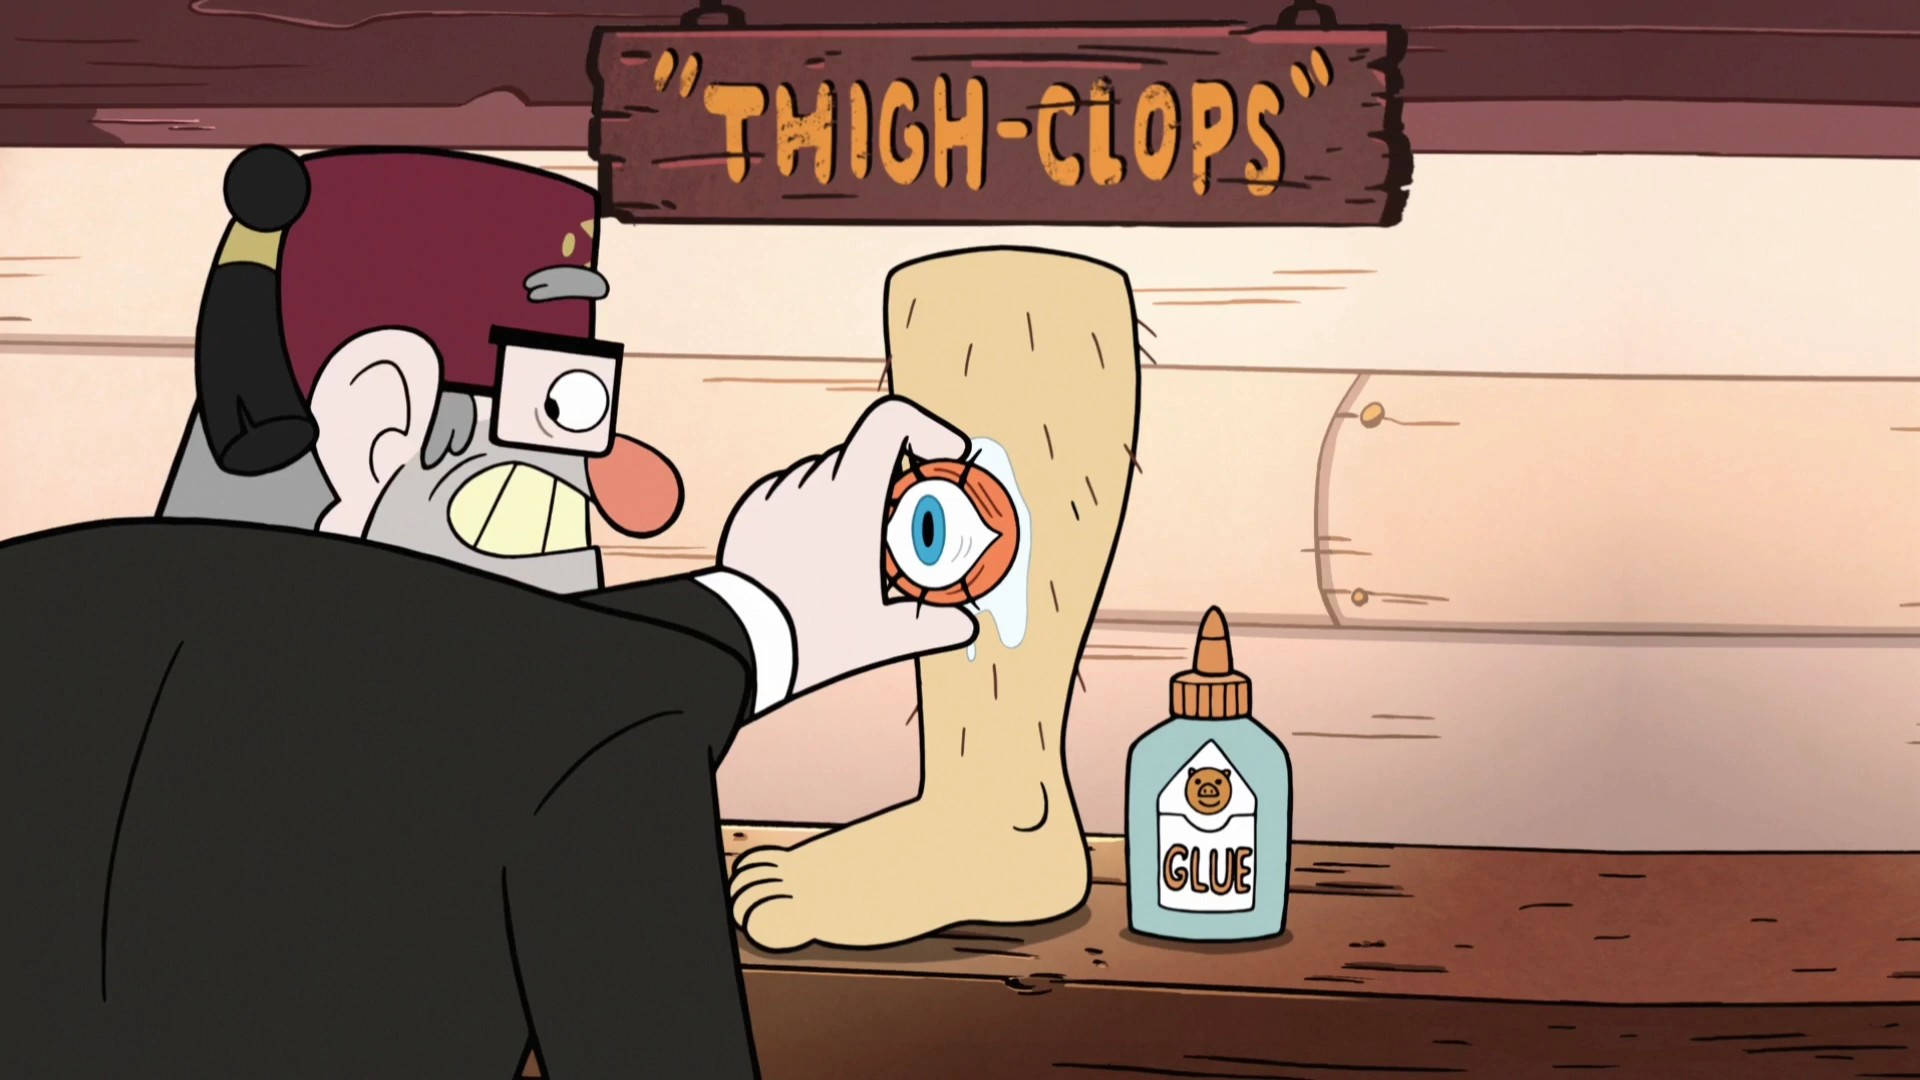 Grunkle Stan With Thigh-clops Background